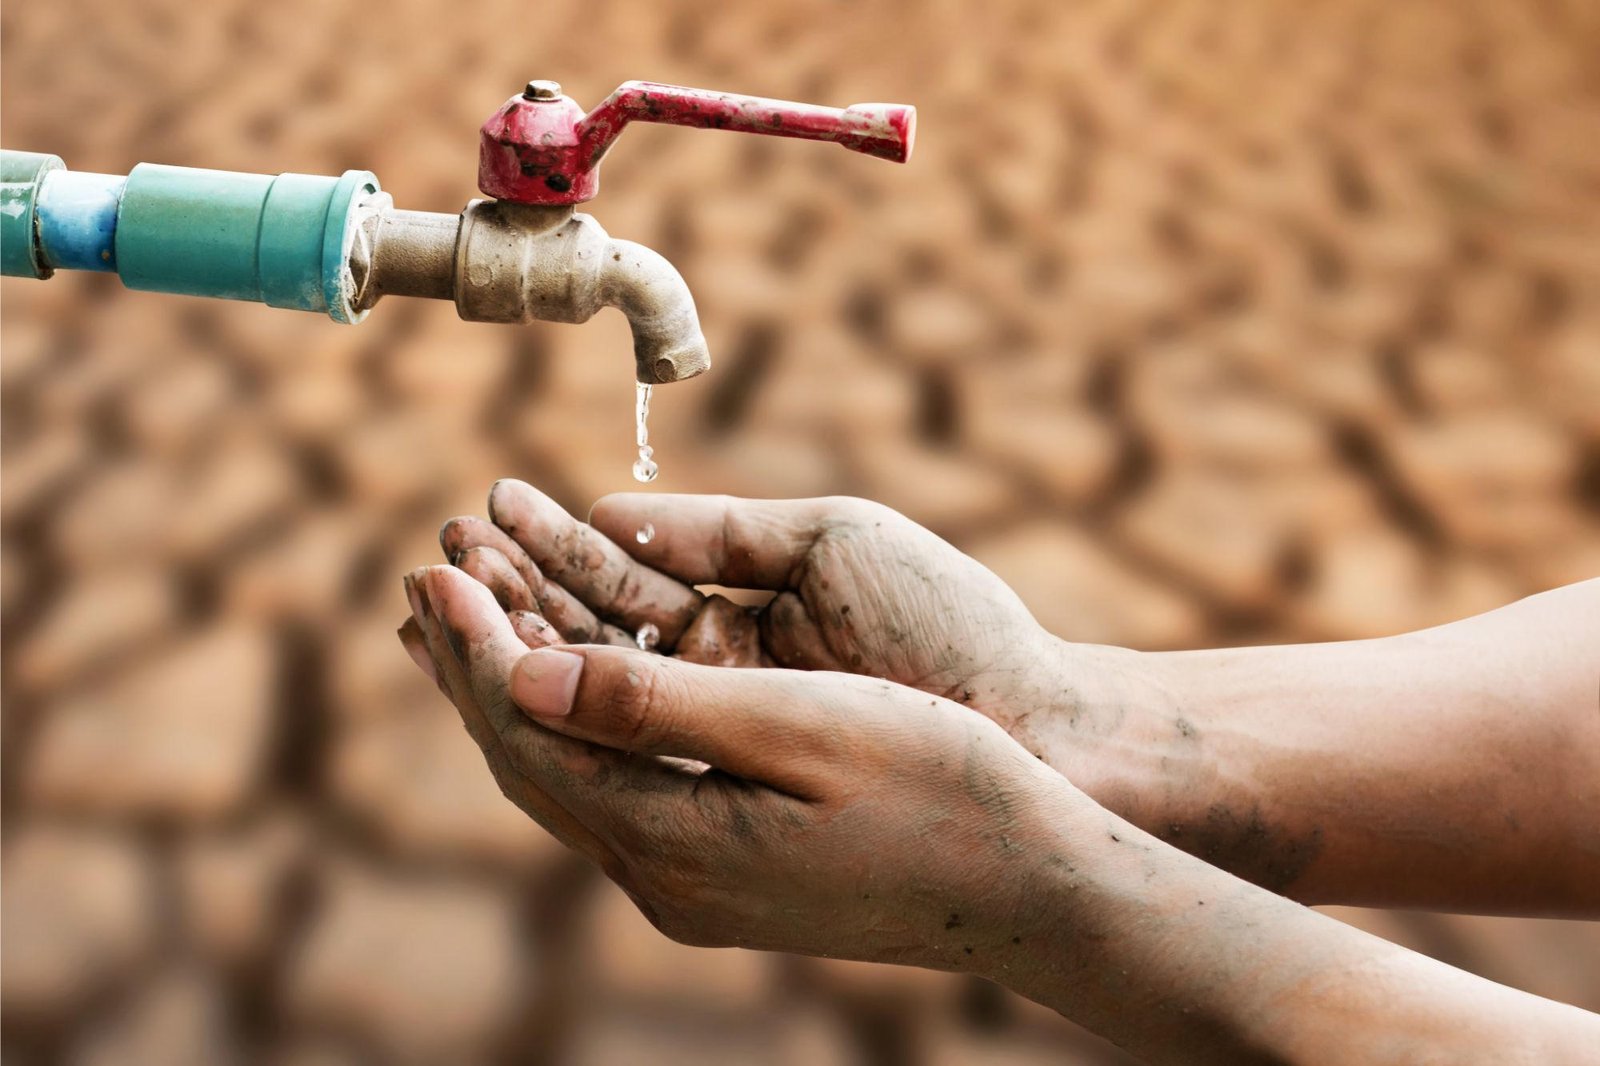 66% of Global Population To Experience Water Scarcity by 2100